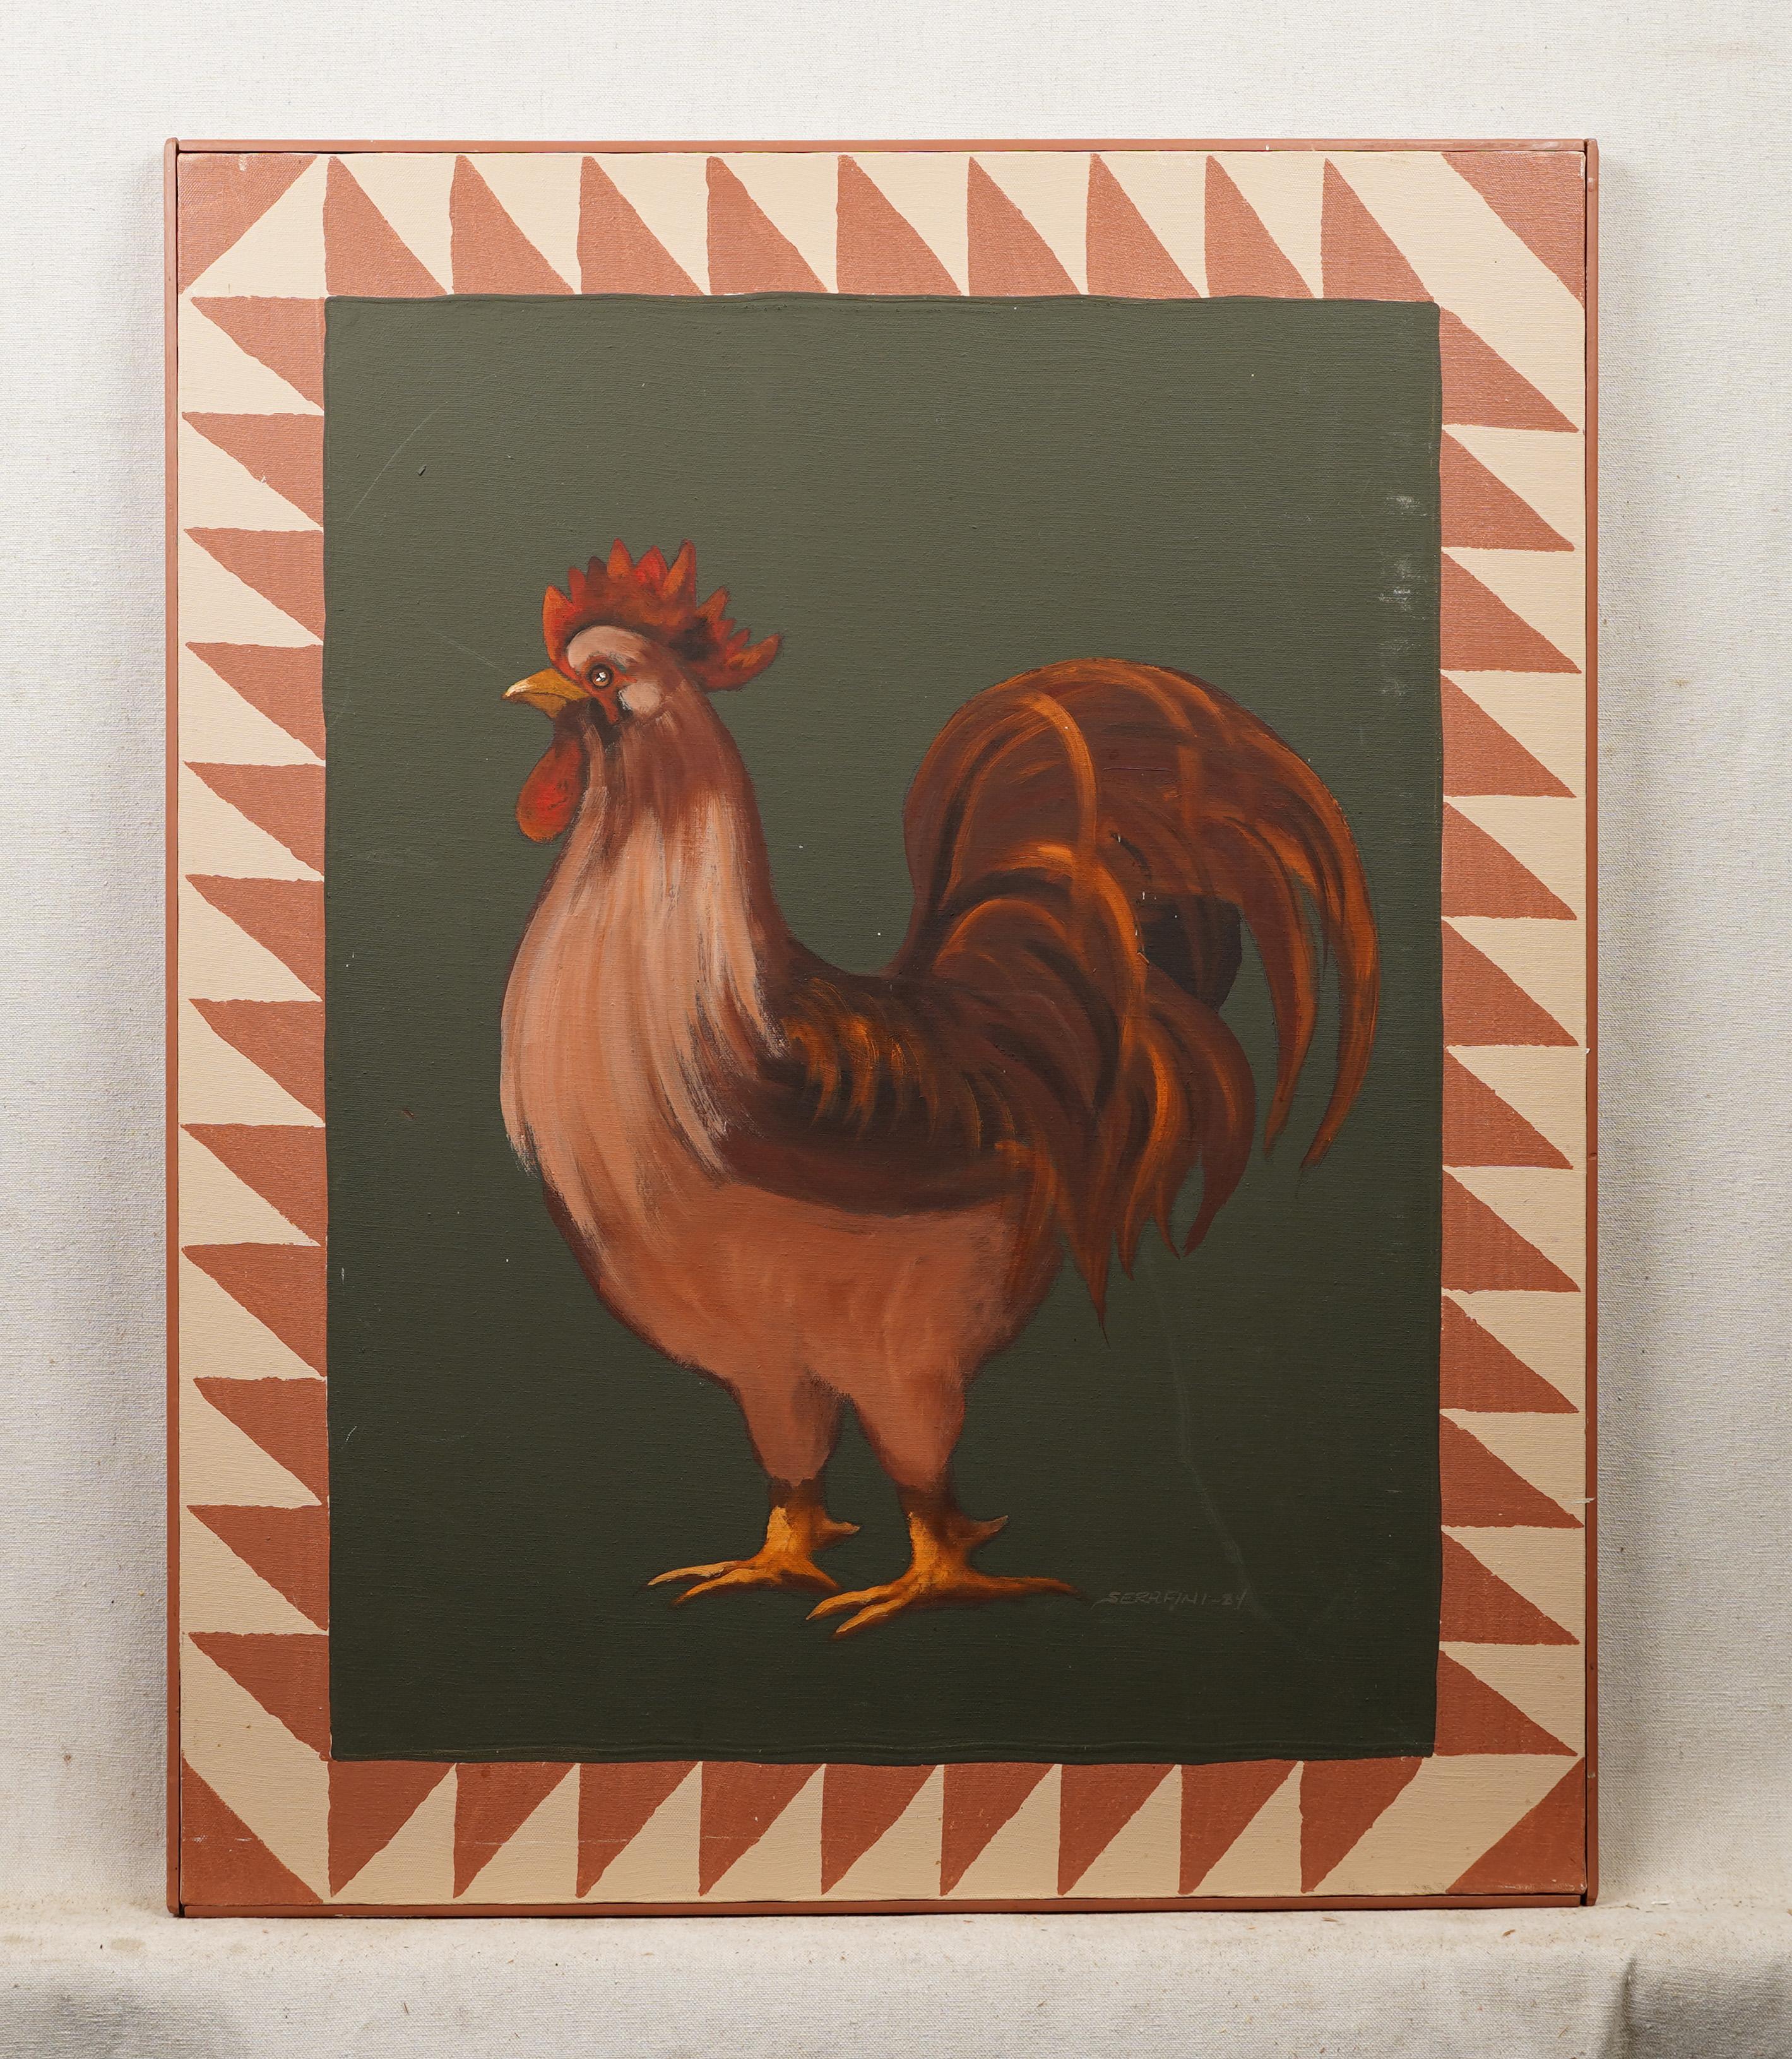 Vintage American modernist chicken oil painting.  Oil on canvas.  